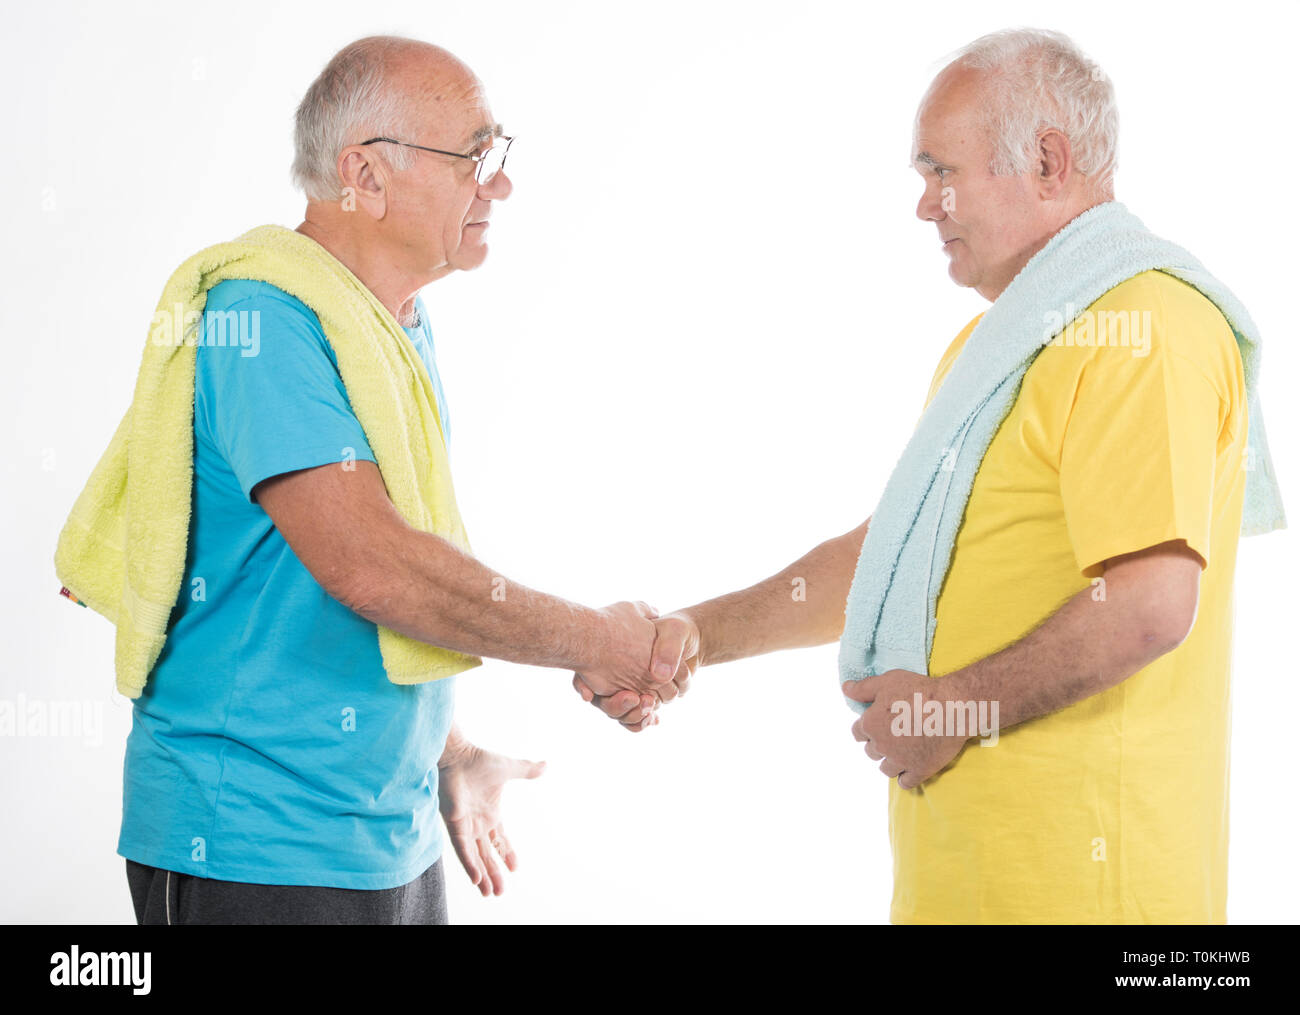 two happy smiling senior men after sport training with yellow and blue t-shirts and towels Stock Photo